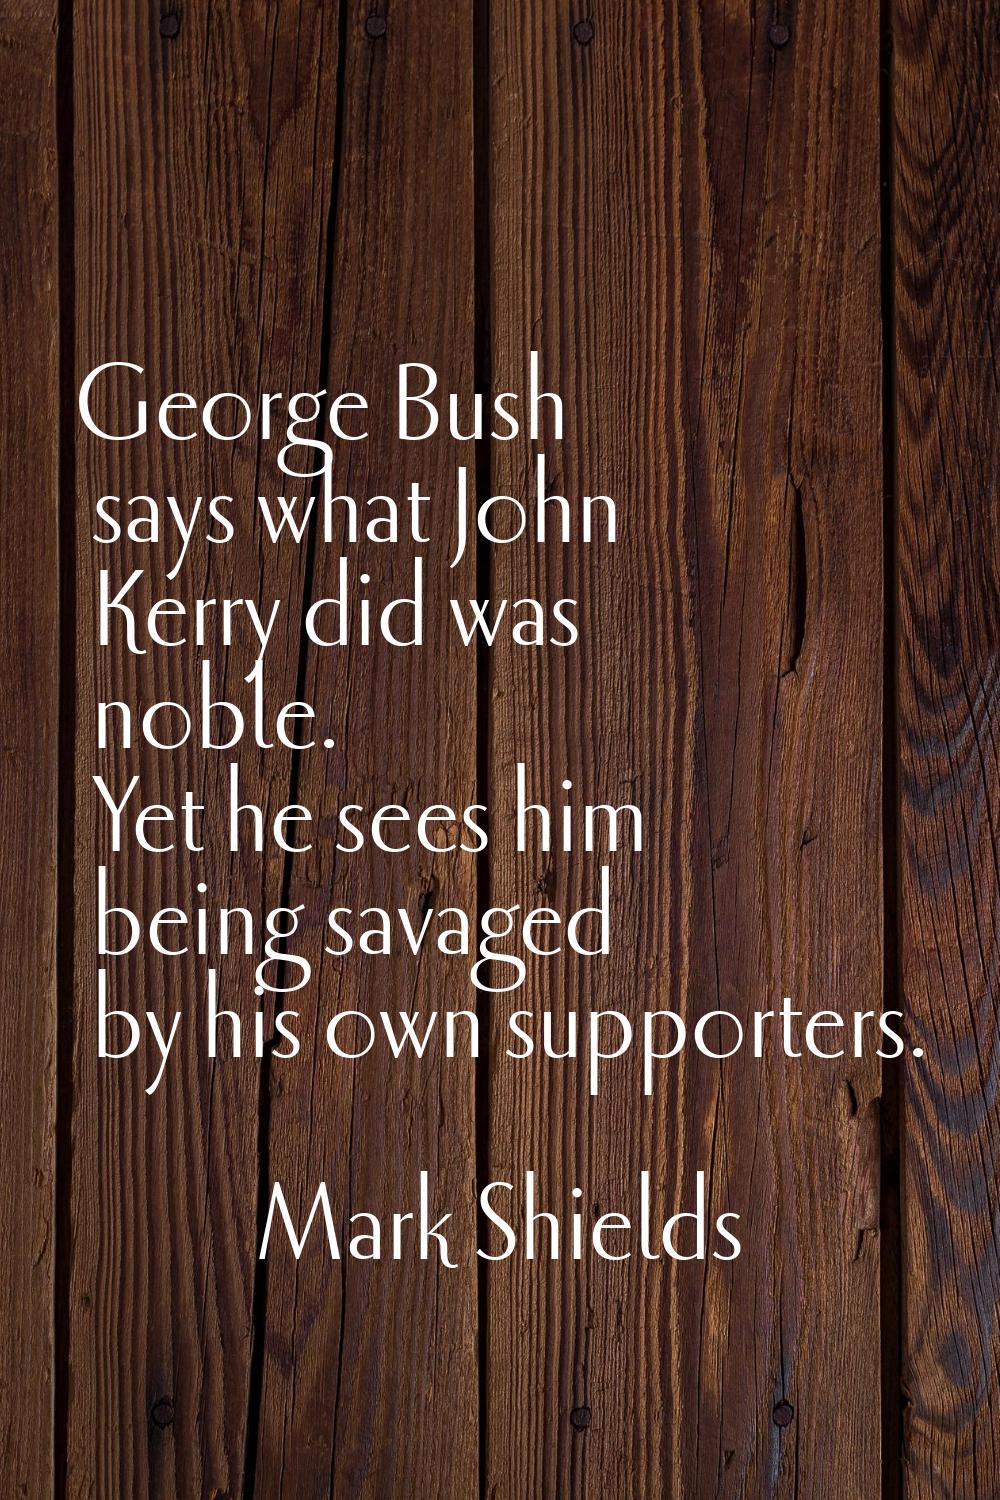 George Bush says what John Kerry did was noble. Yet he sees him being savaged by his own supporters